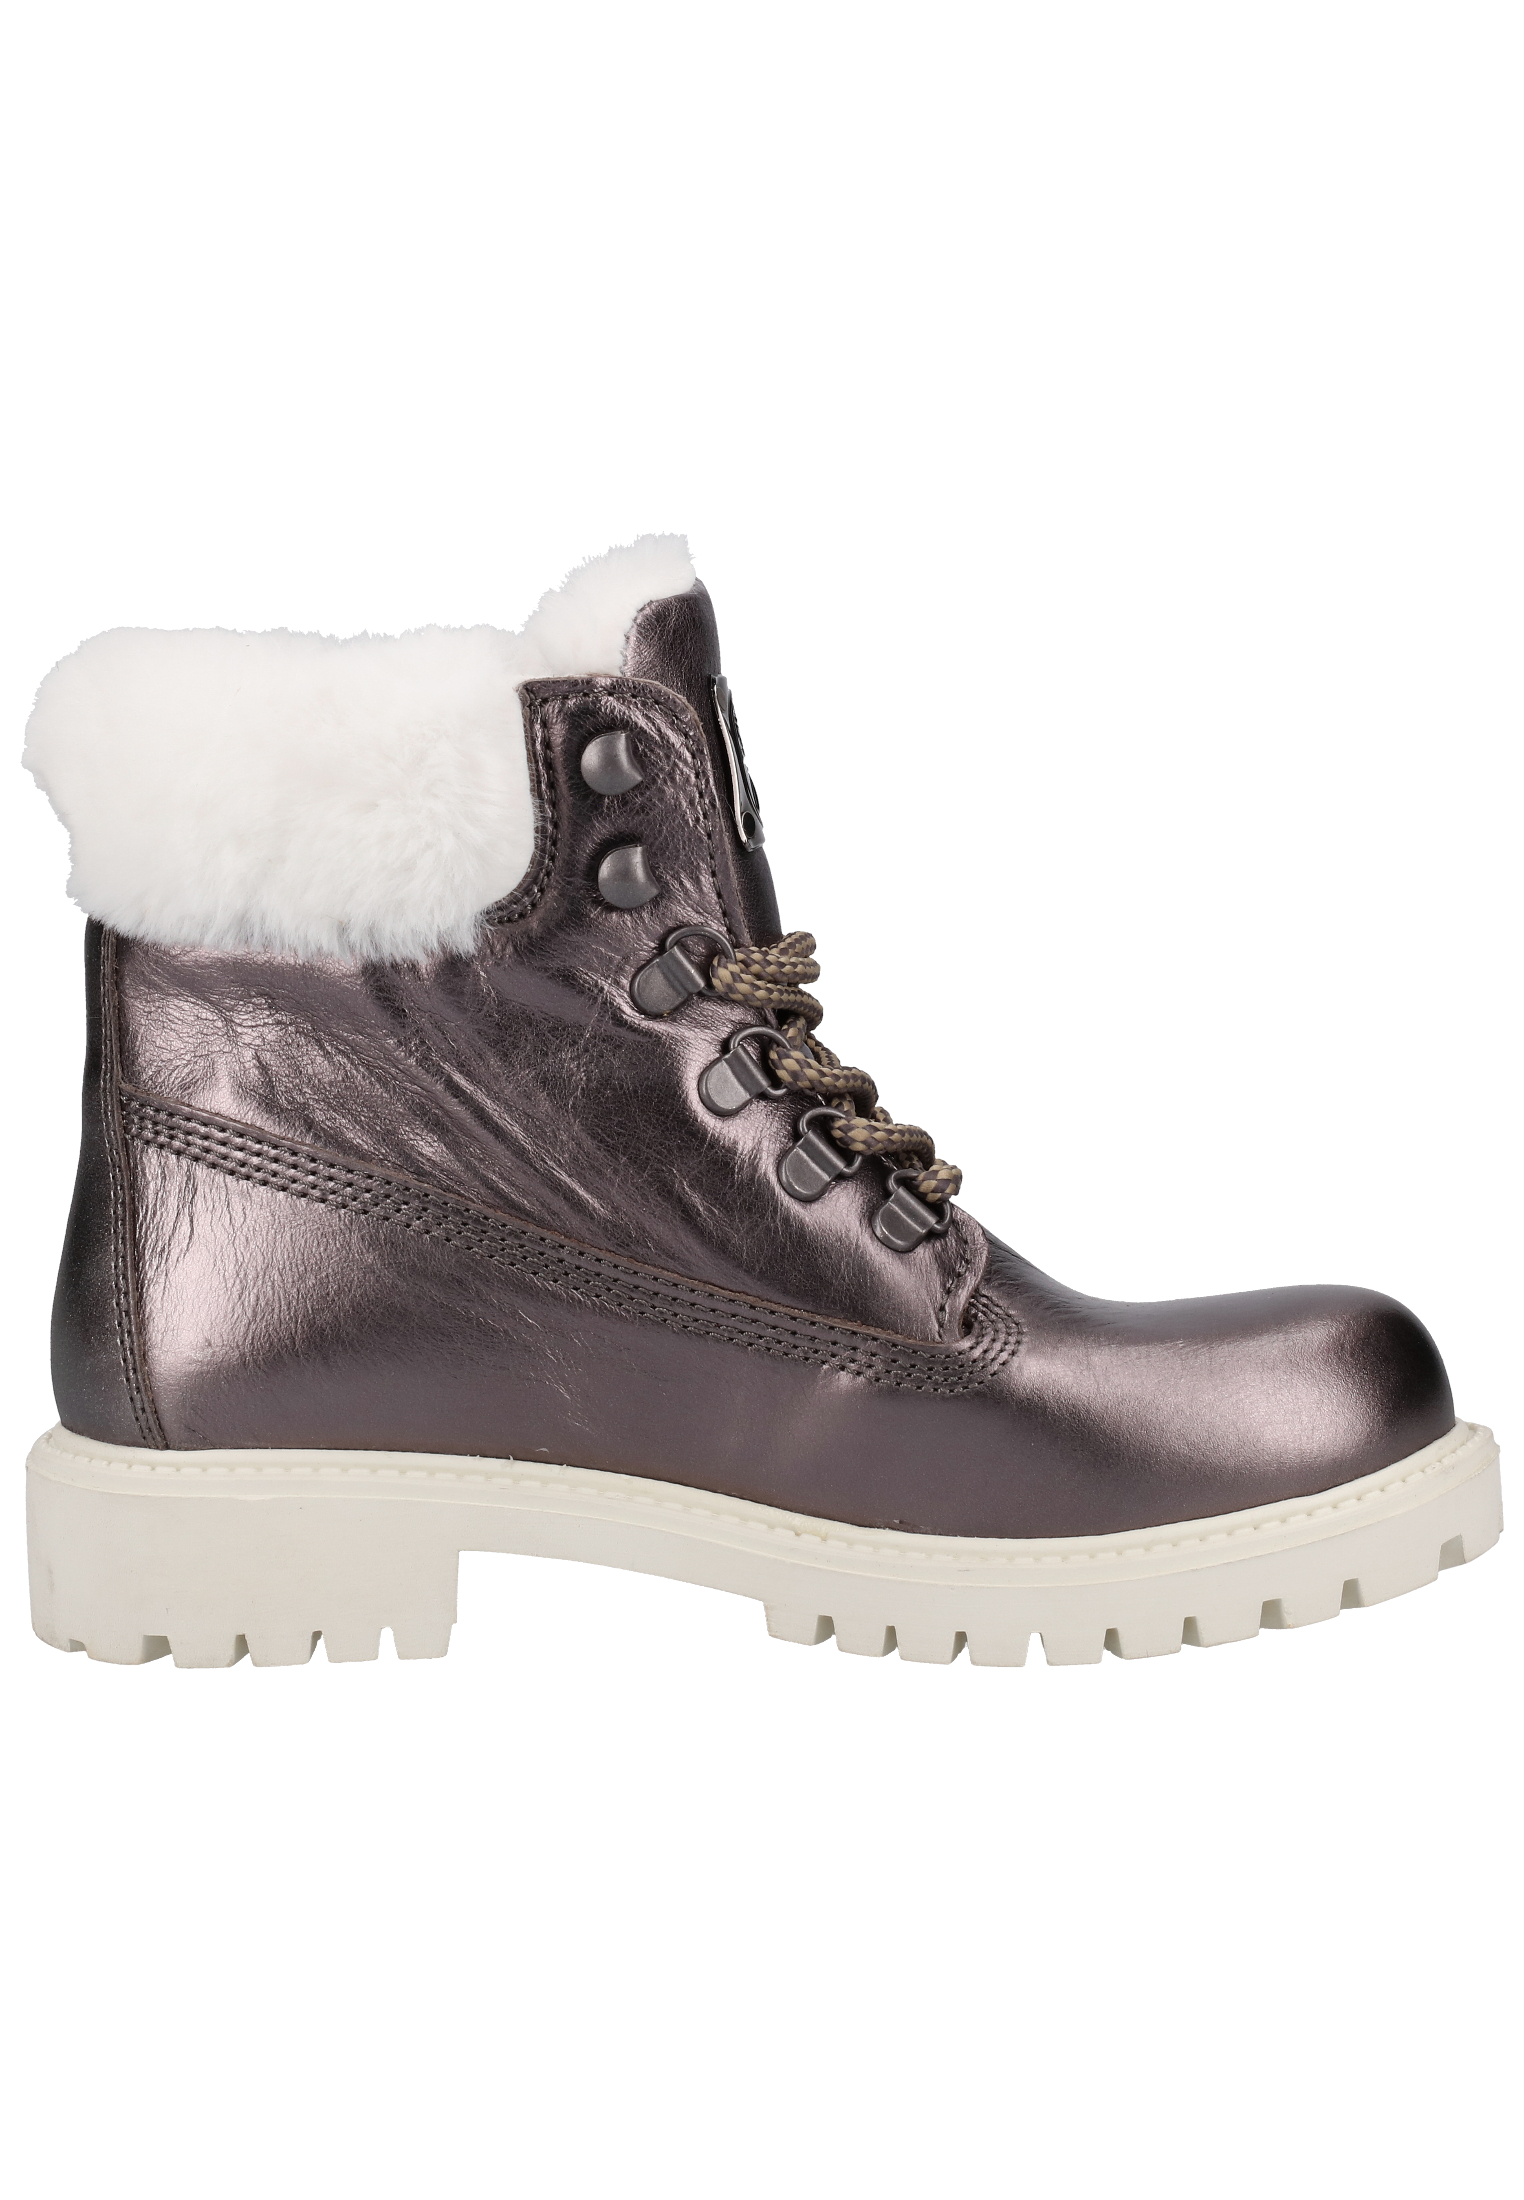 Darkwood Stiefelette in Taupe 